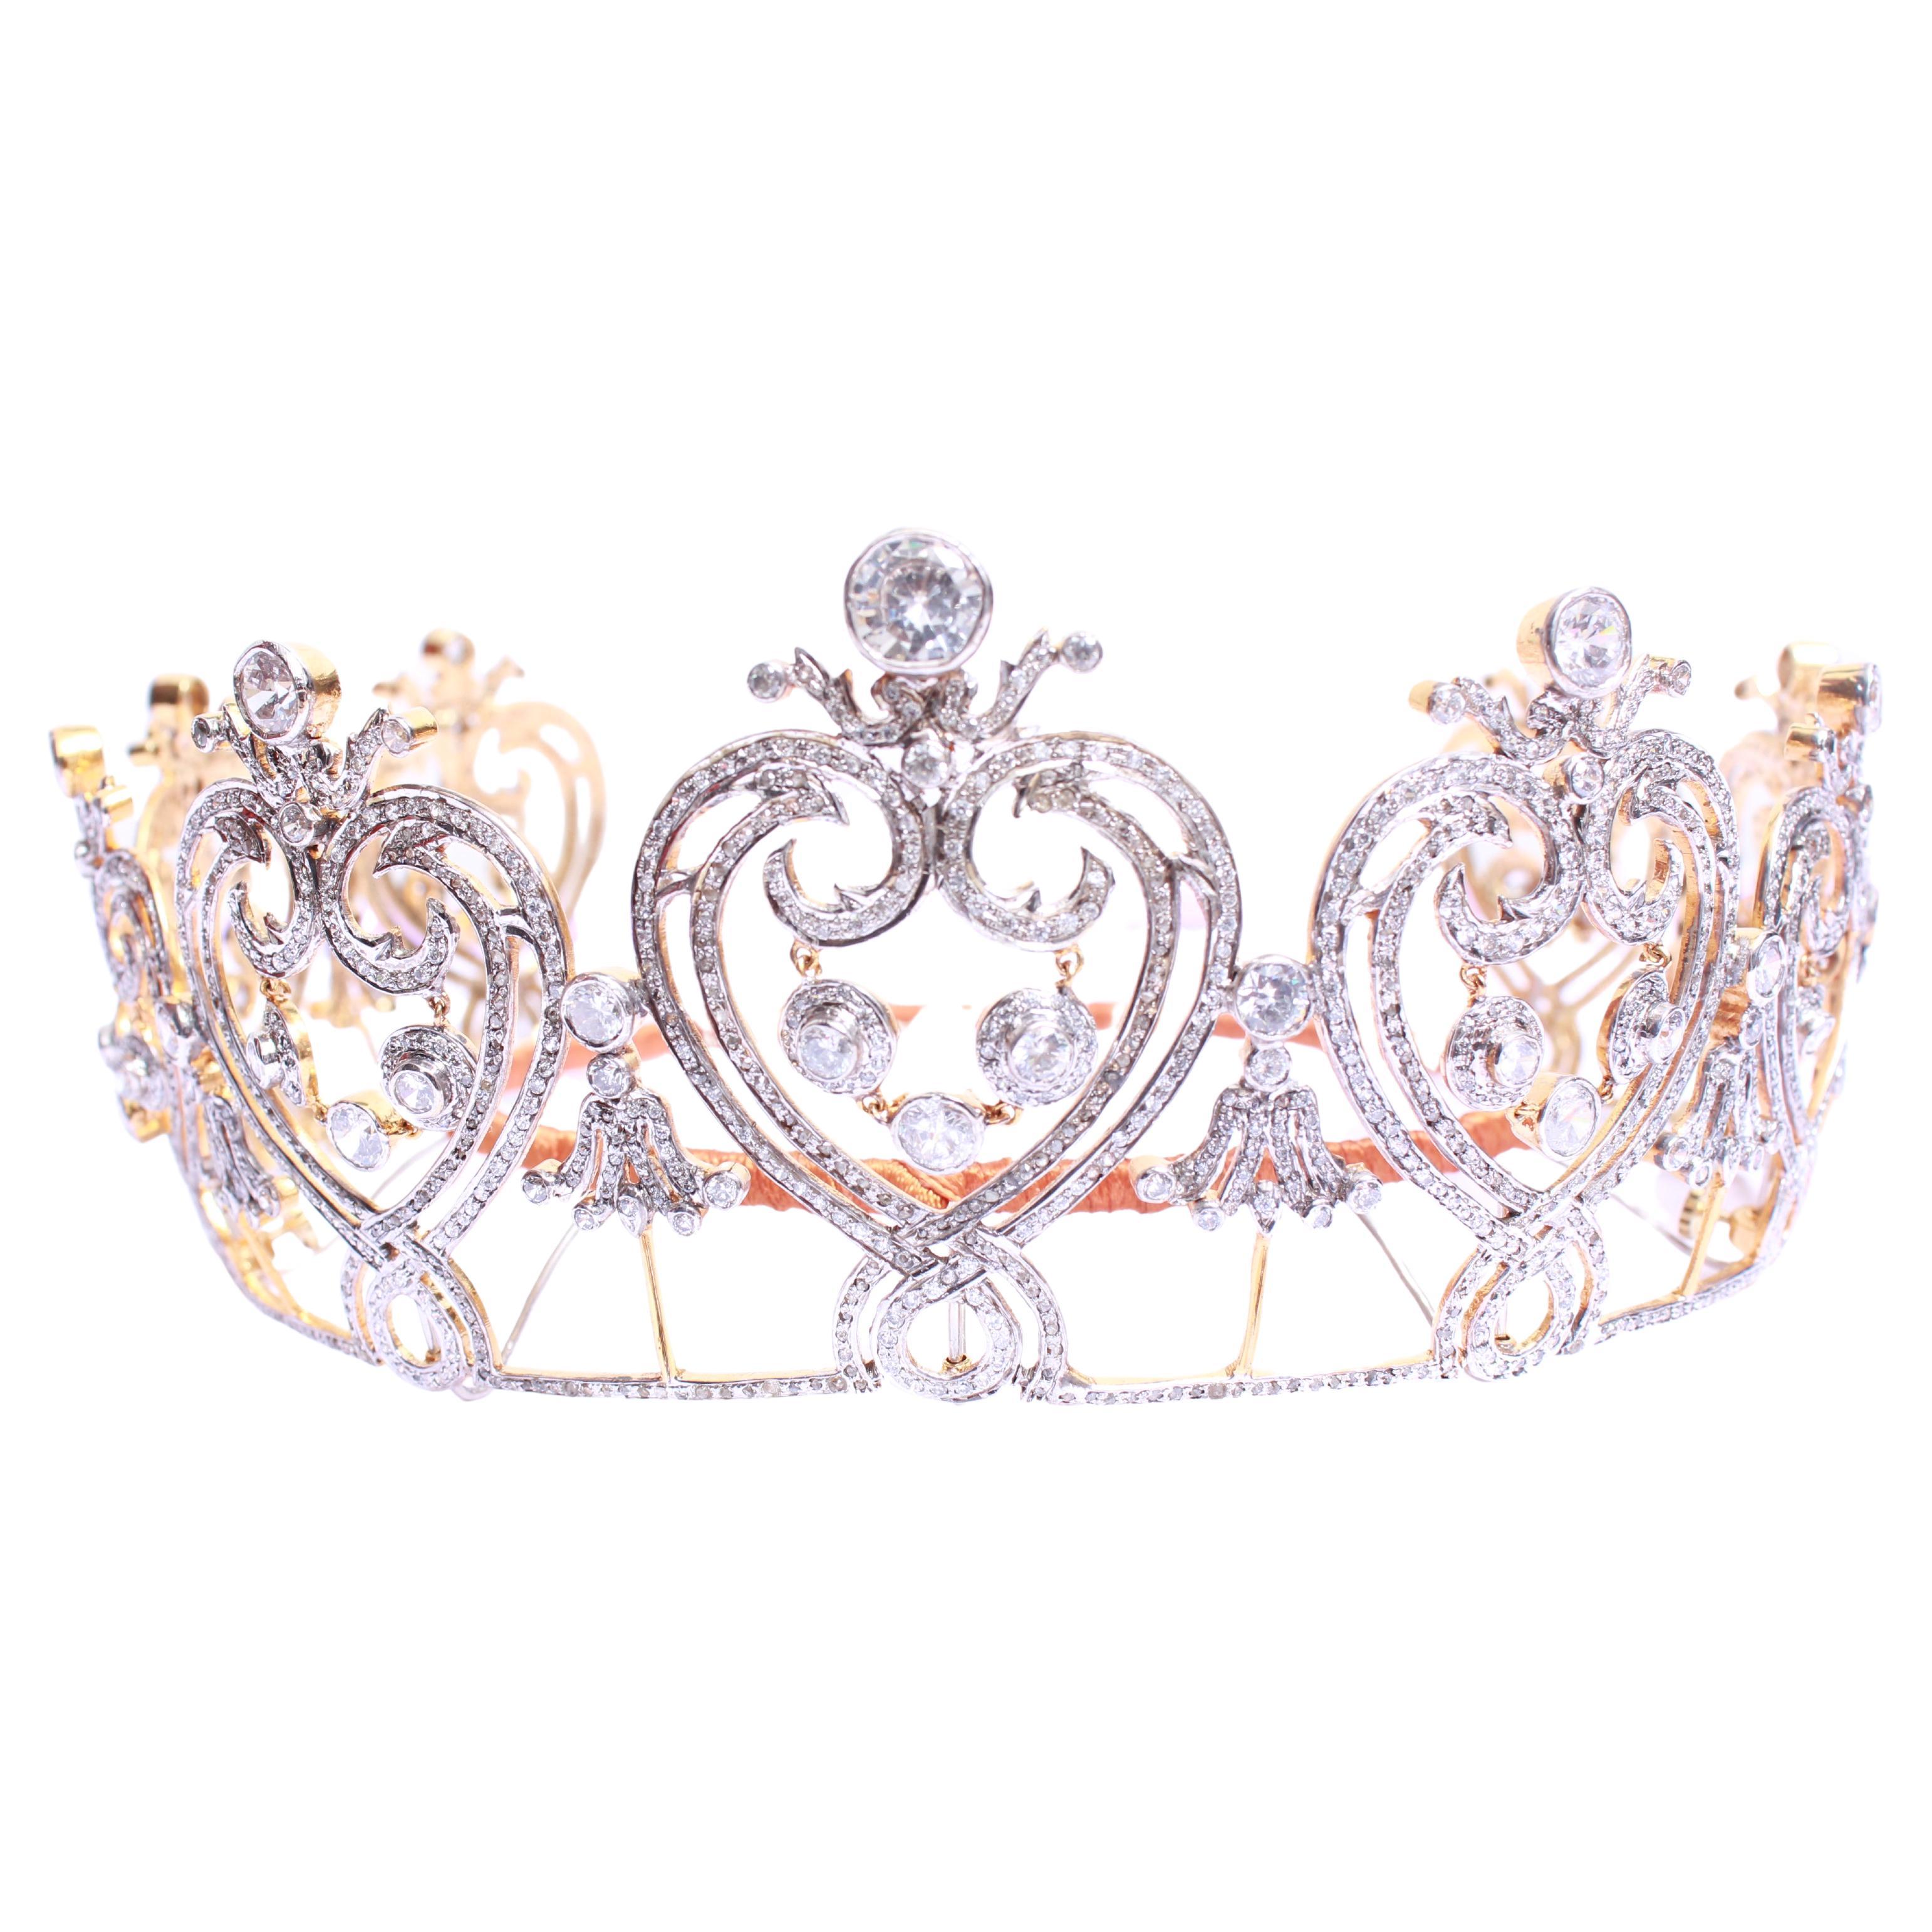 For the queen in you!
This royal tiara is a symbol of beauty and self-love. It is handmade with Natural pave diamonds and white topaz in sterling silver. 
Diamond- Pave diamonds
Diamond weight- 14.25ct
Diamond color- White with a tint of